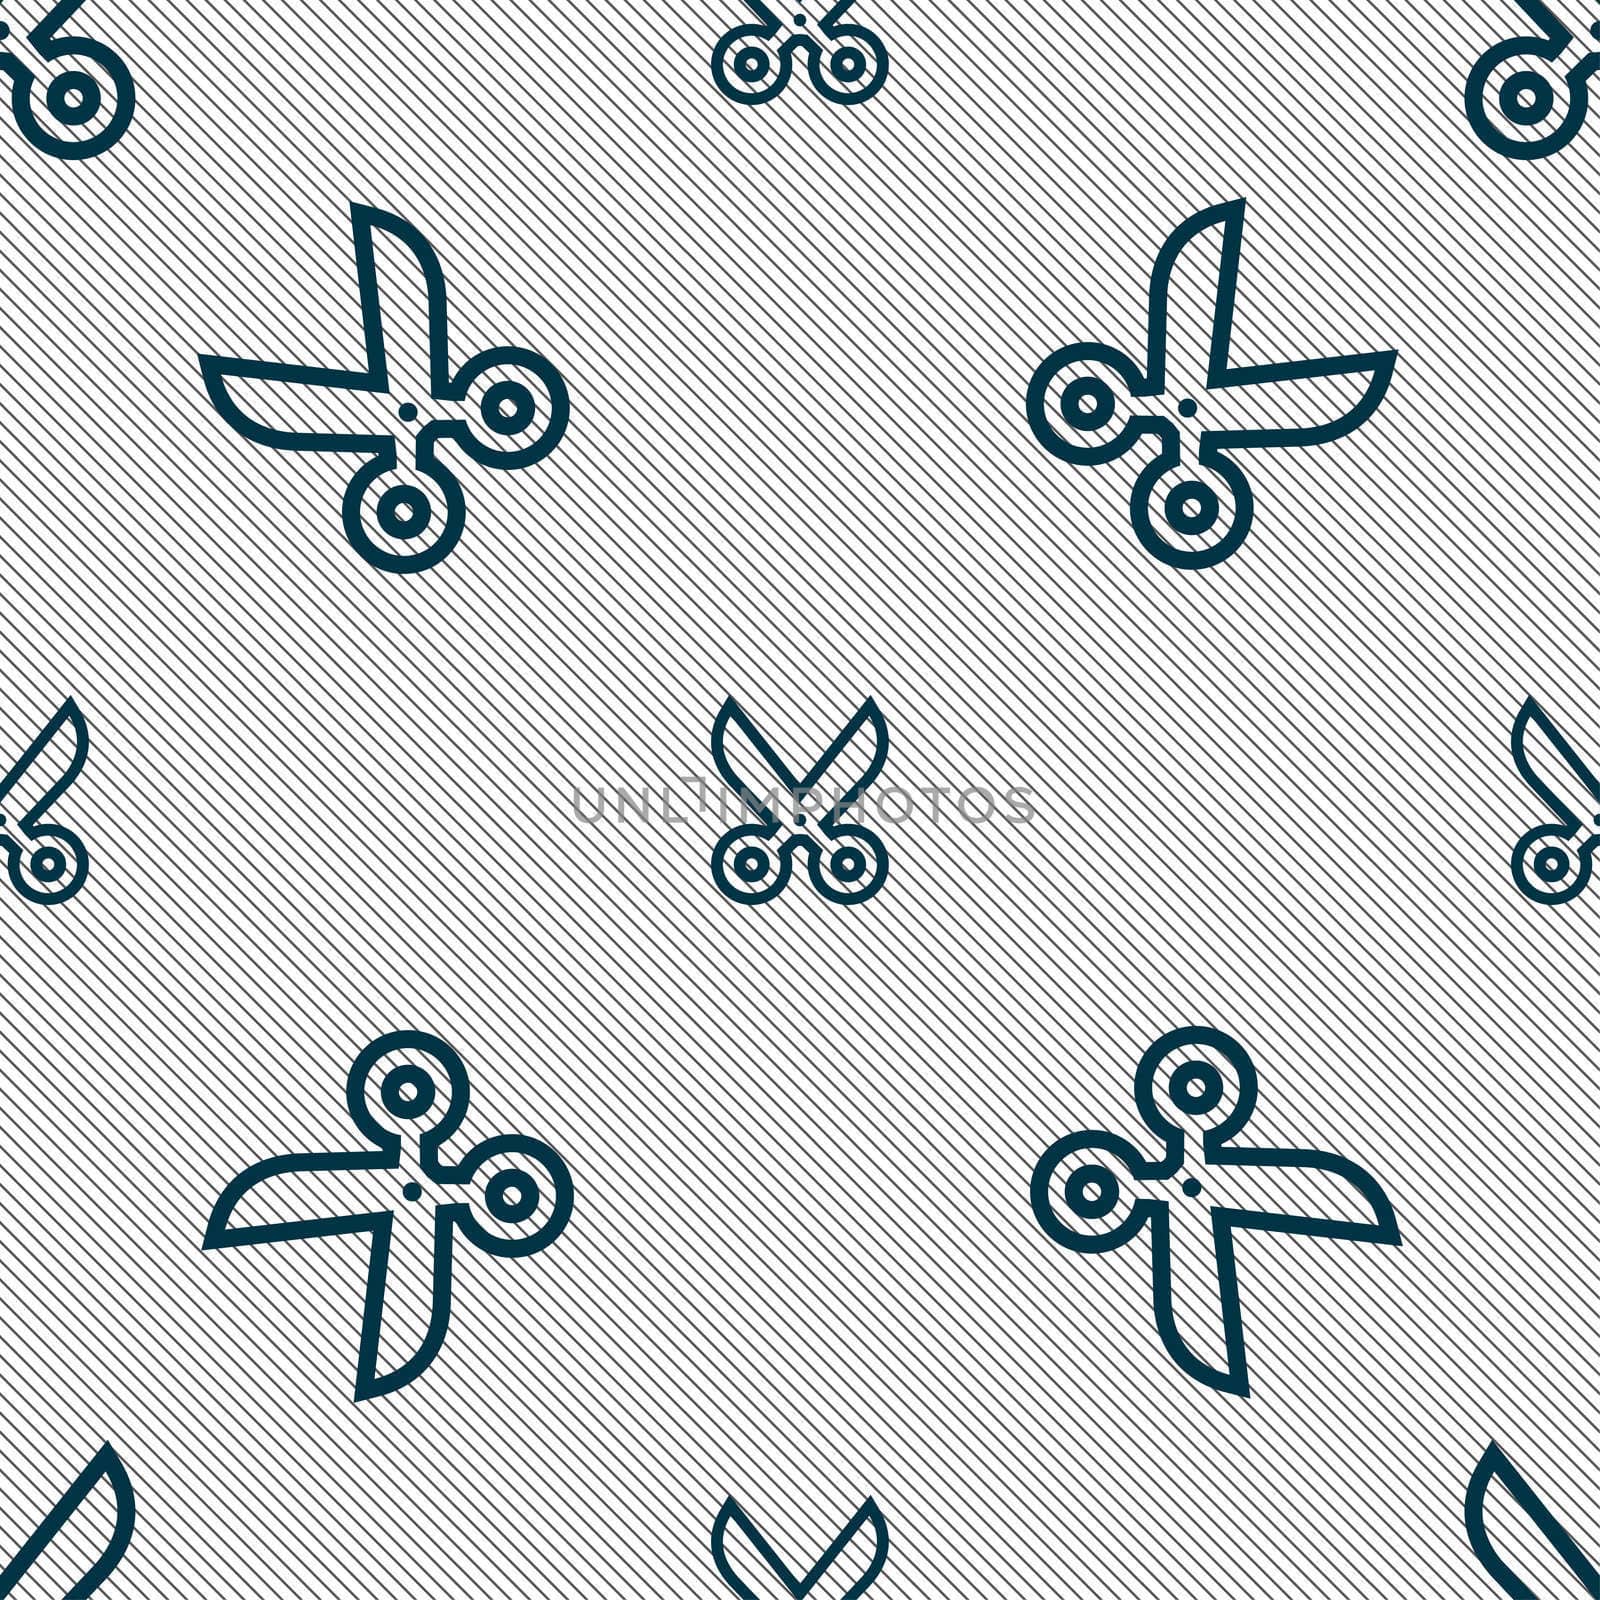 scissors icon sign. Seamless pattern with geometric texture. illustration